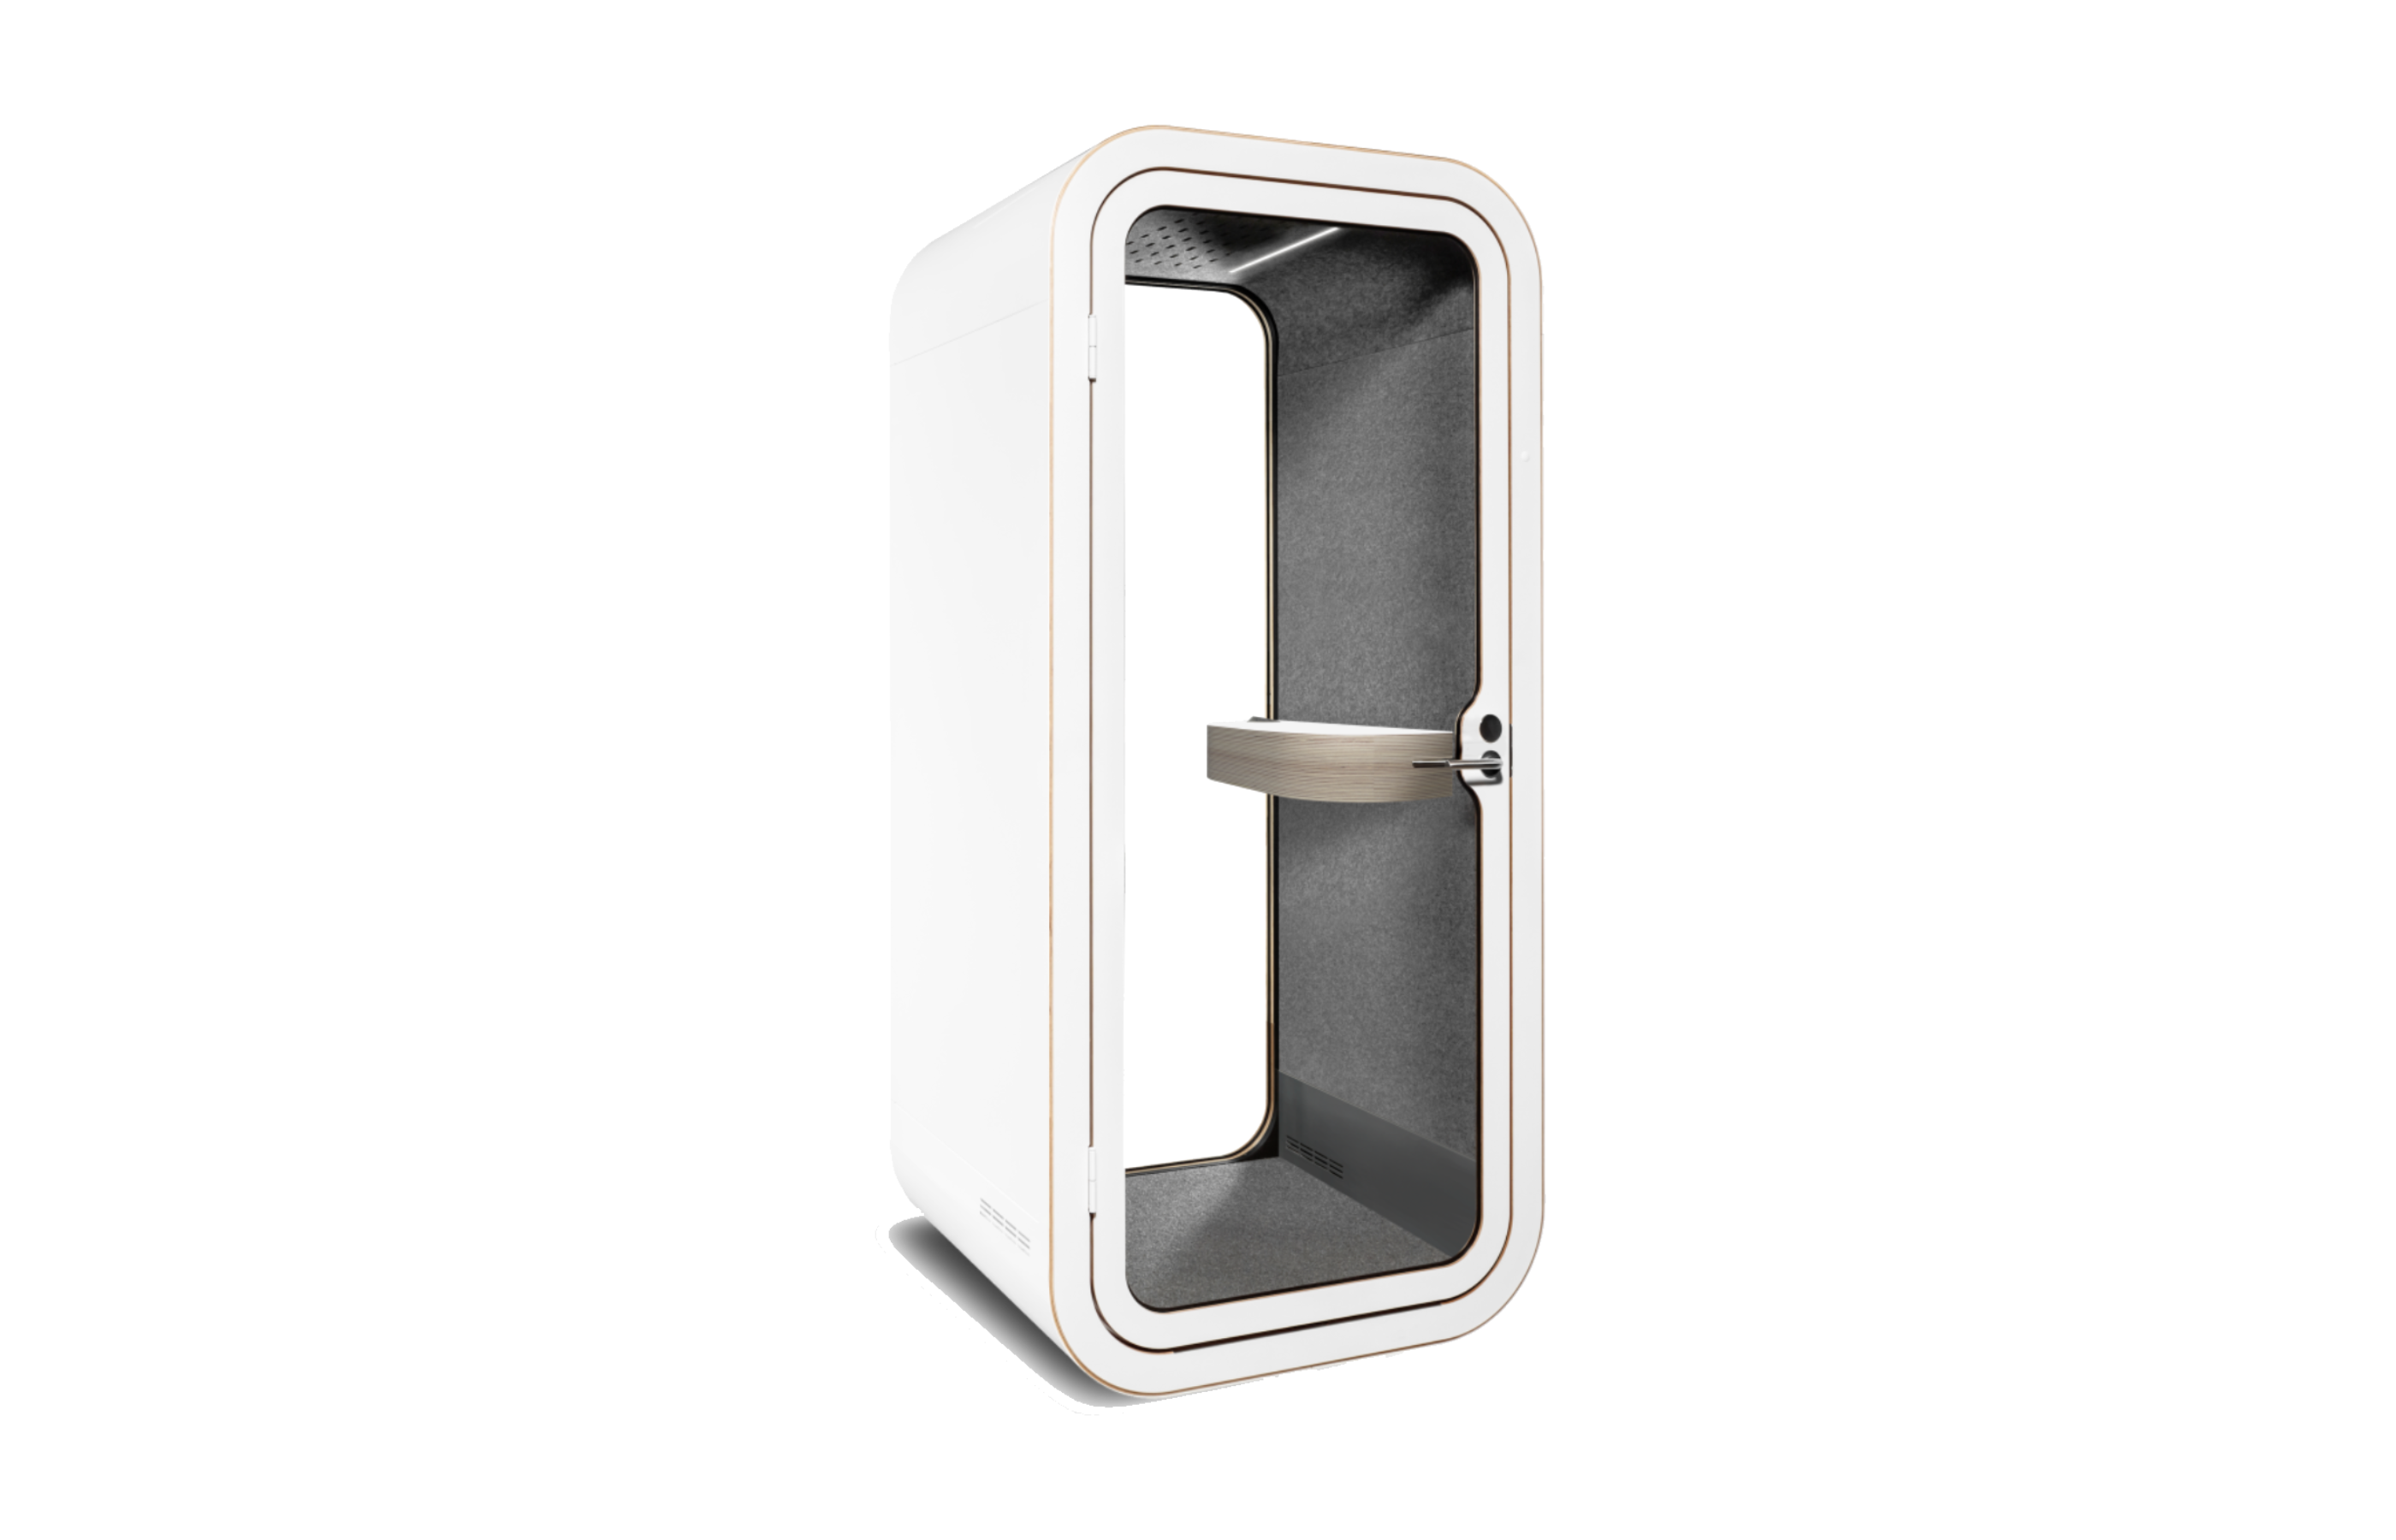 On the QT Modular Office Phone Booth & Pods - Steelcase